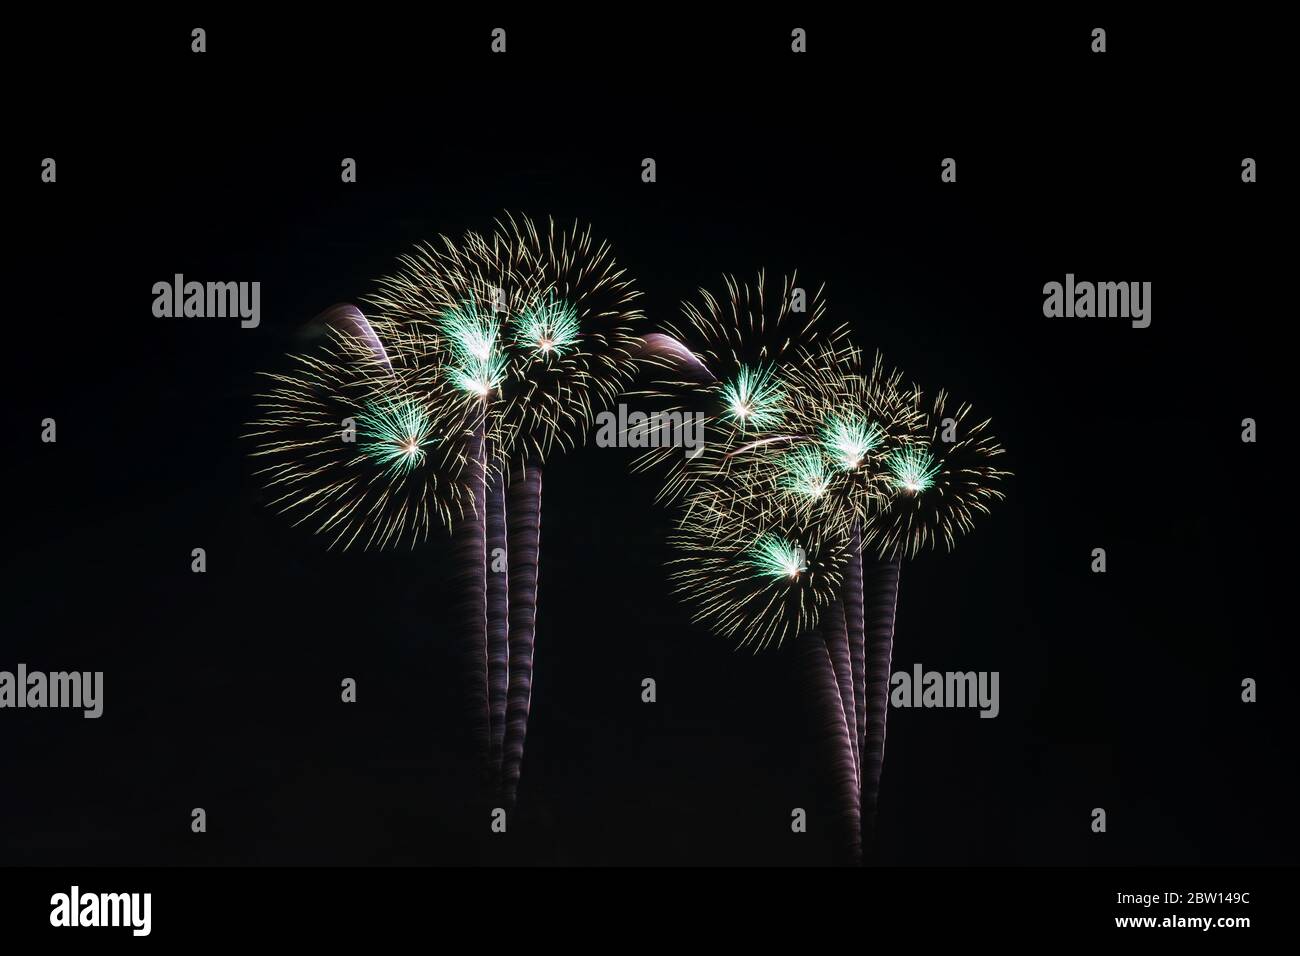 Colorful fireworks display at holiday night. Stock Photo